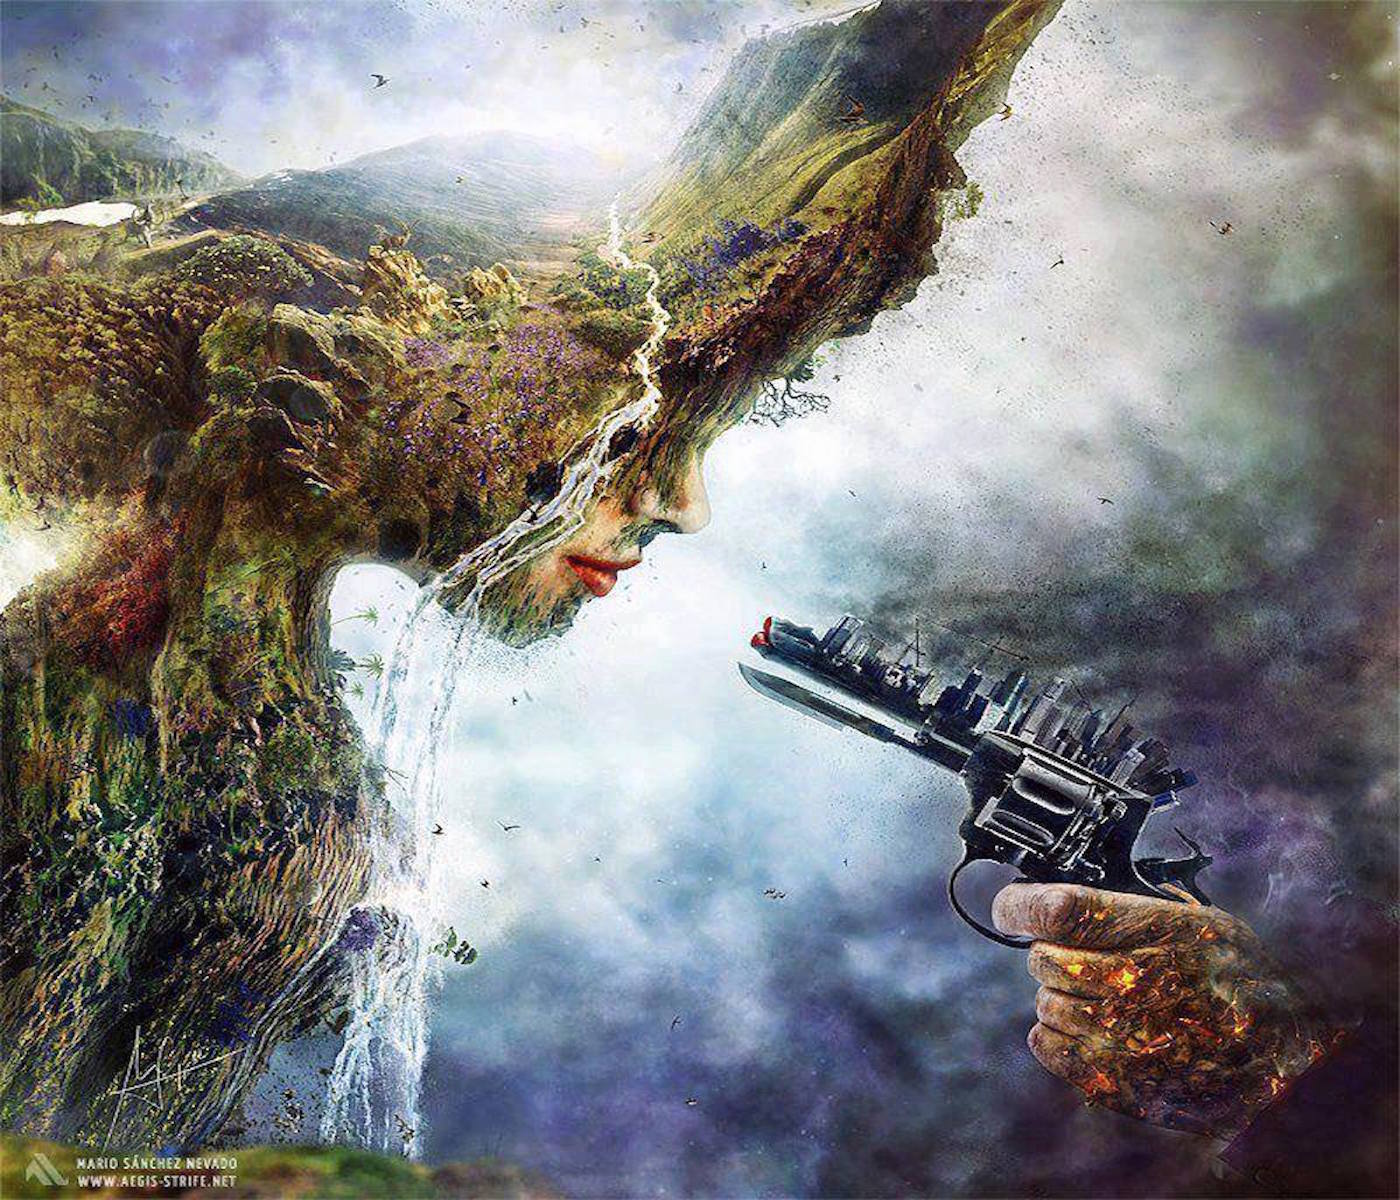 End Ecocide on Earth